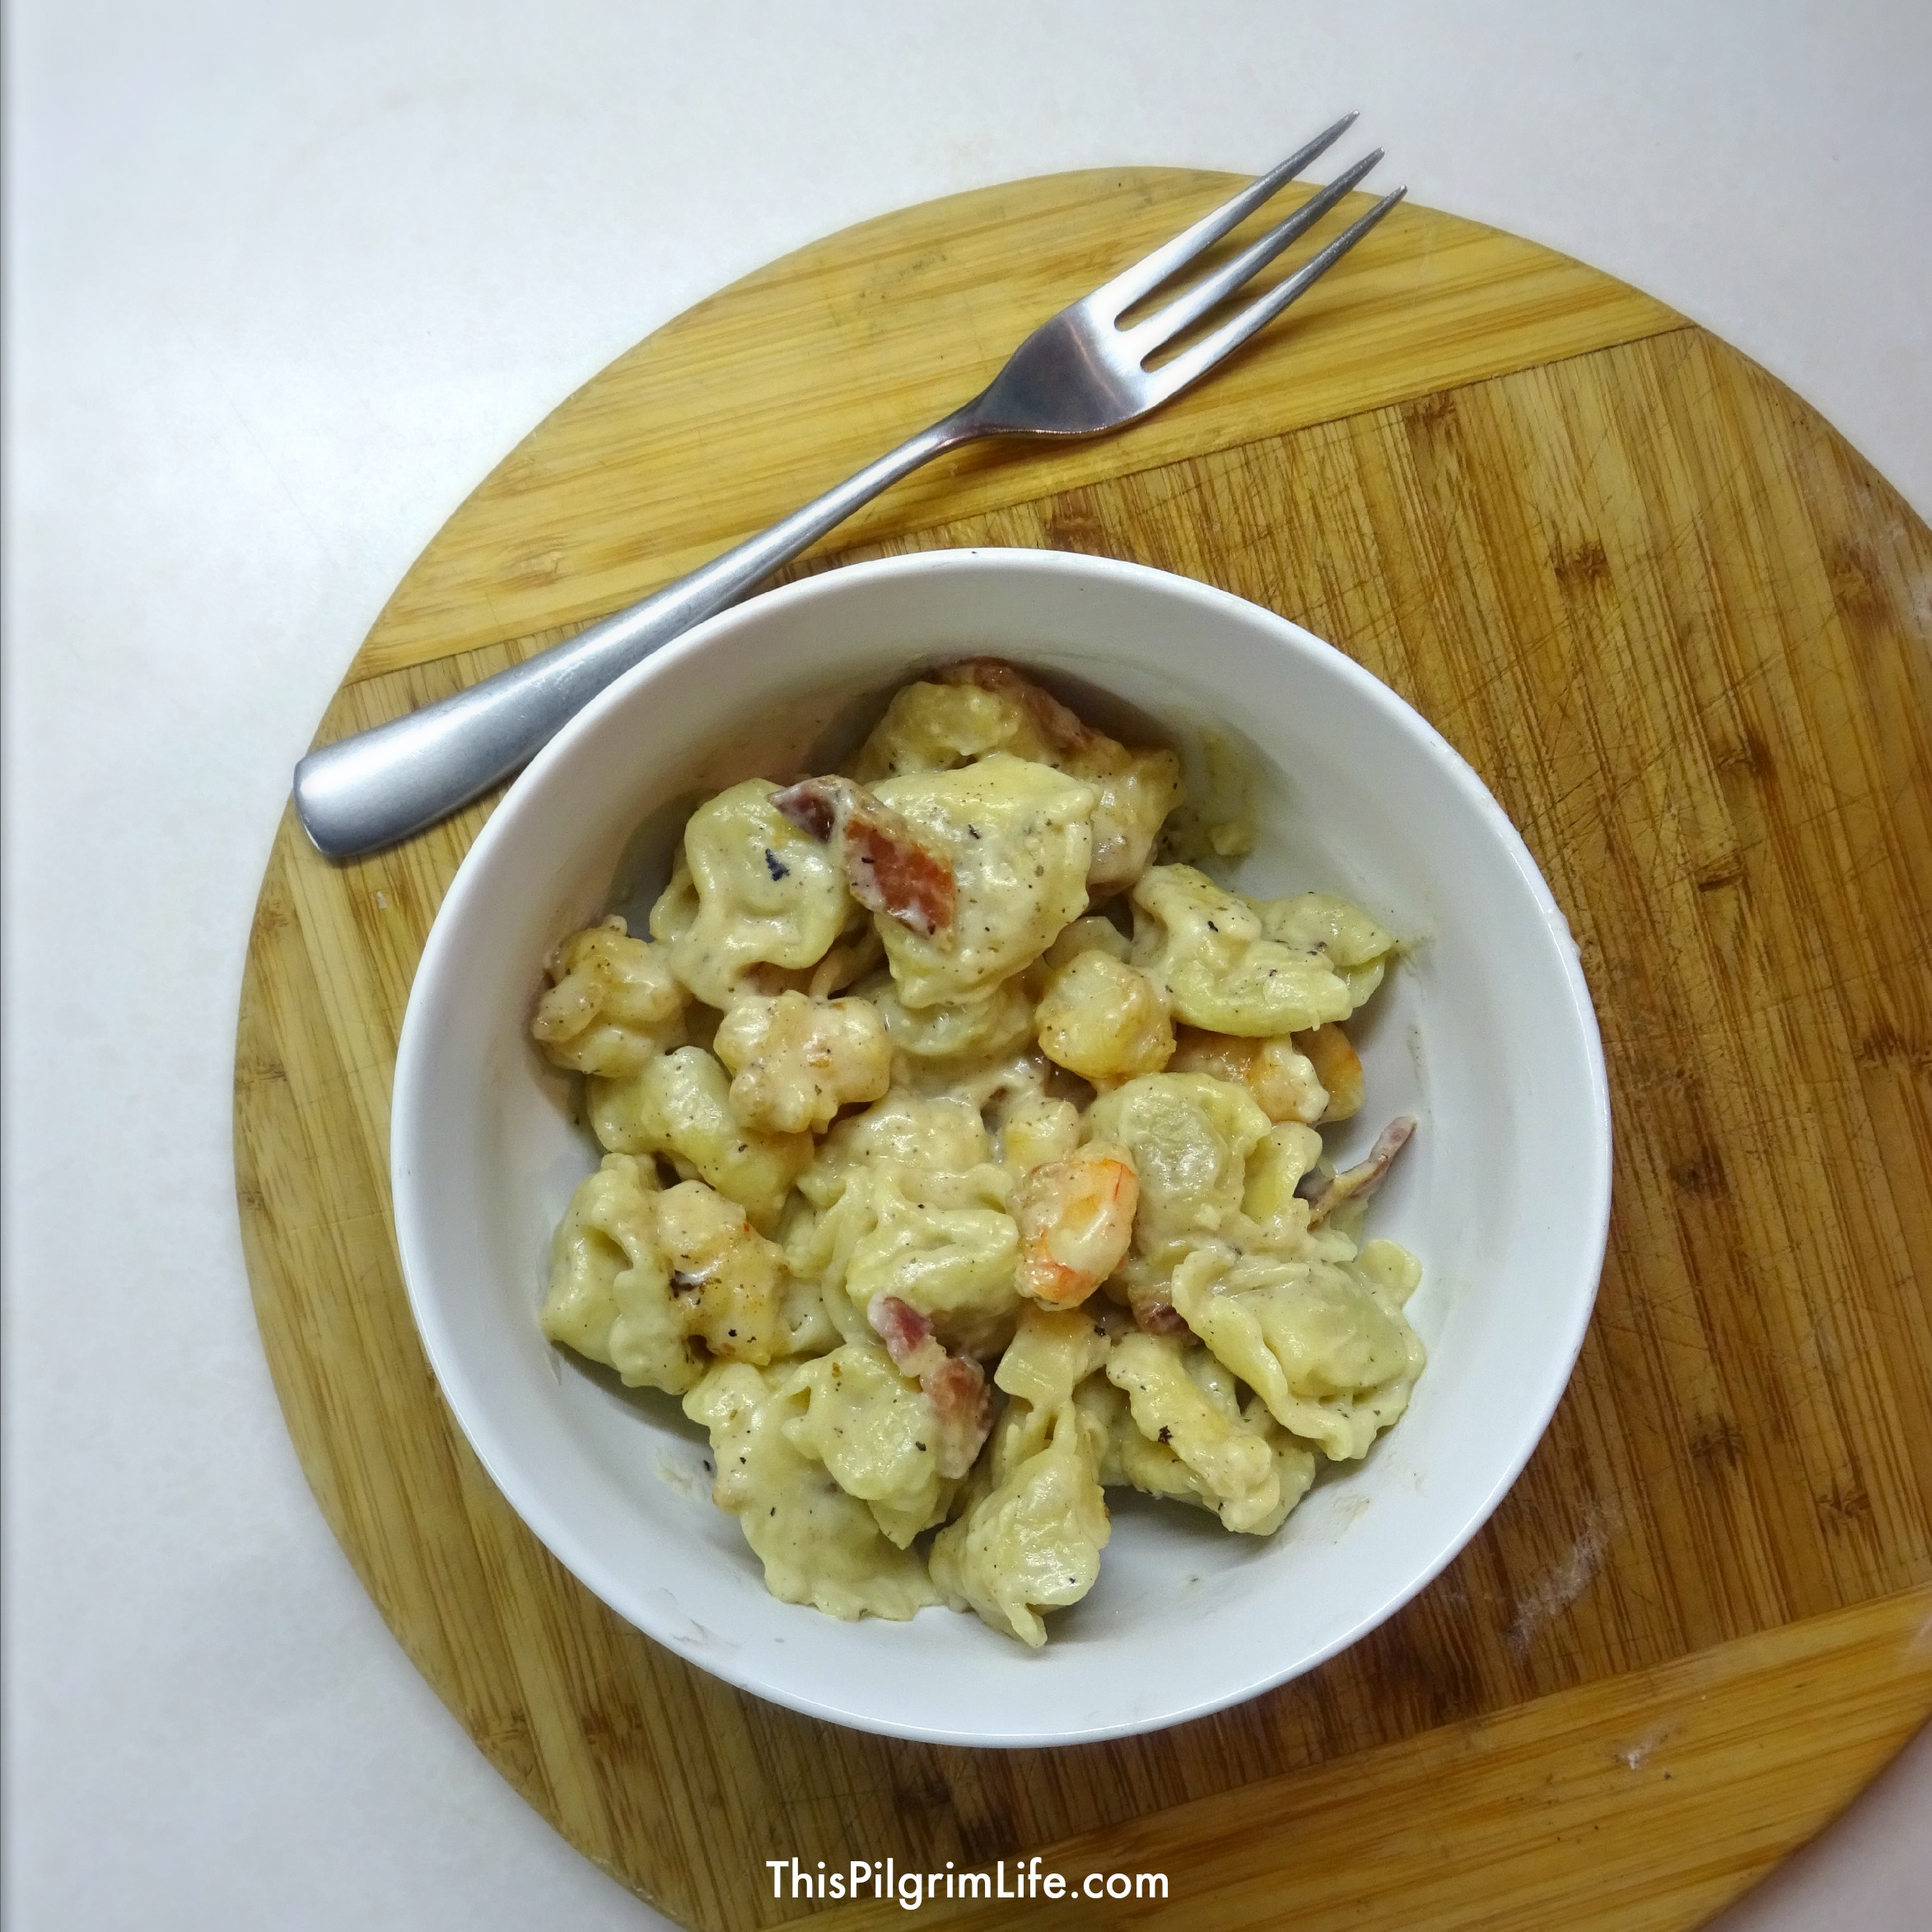 30 Minute Tortellini with Shrimp and Bacon